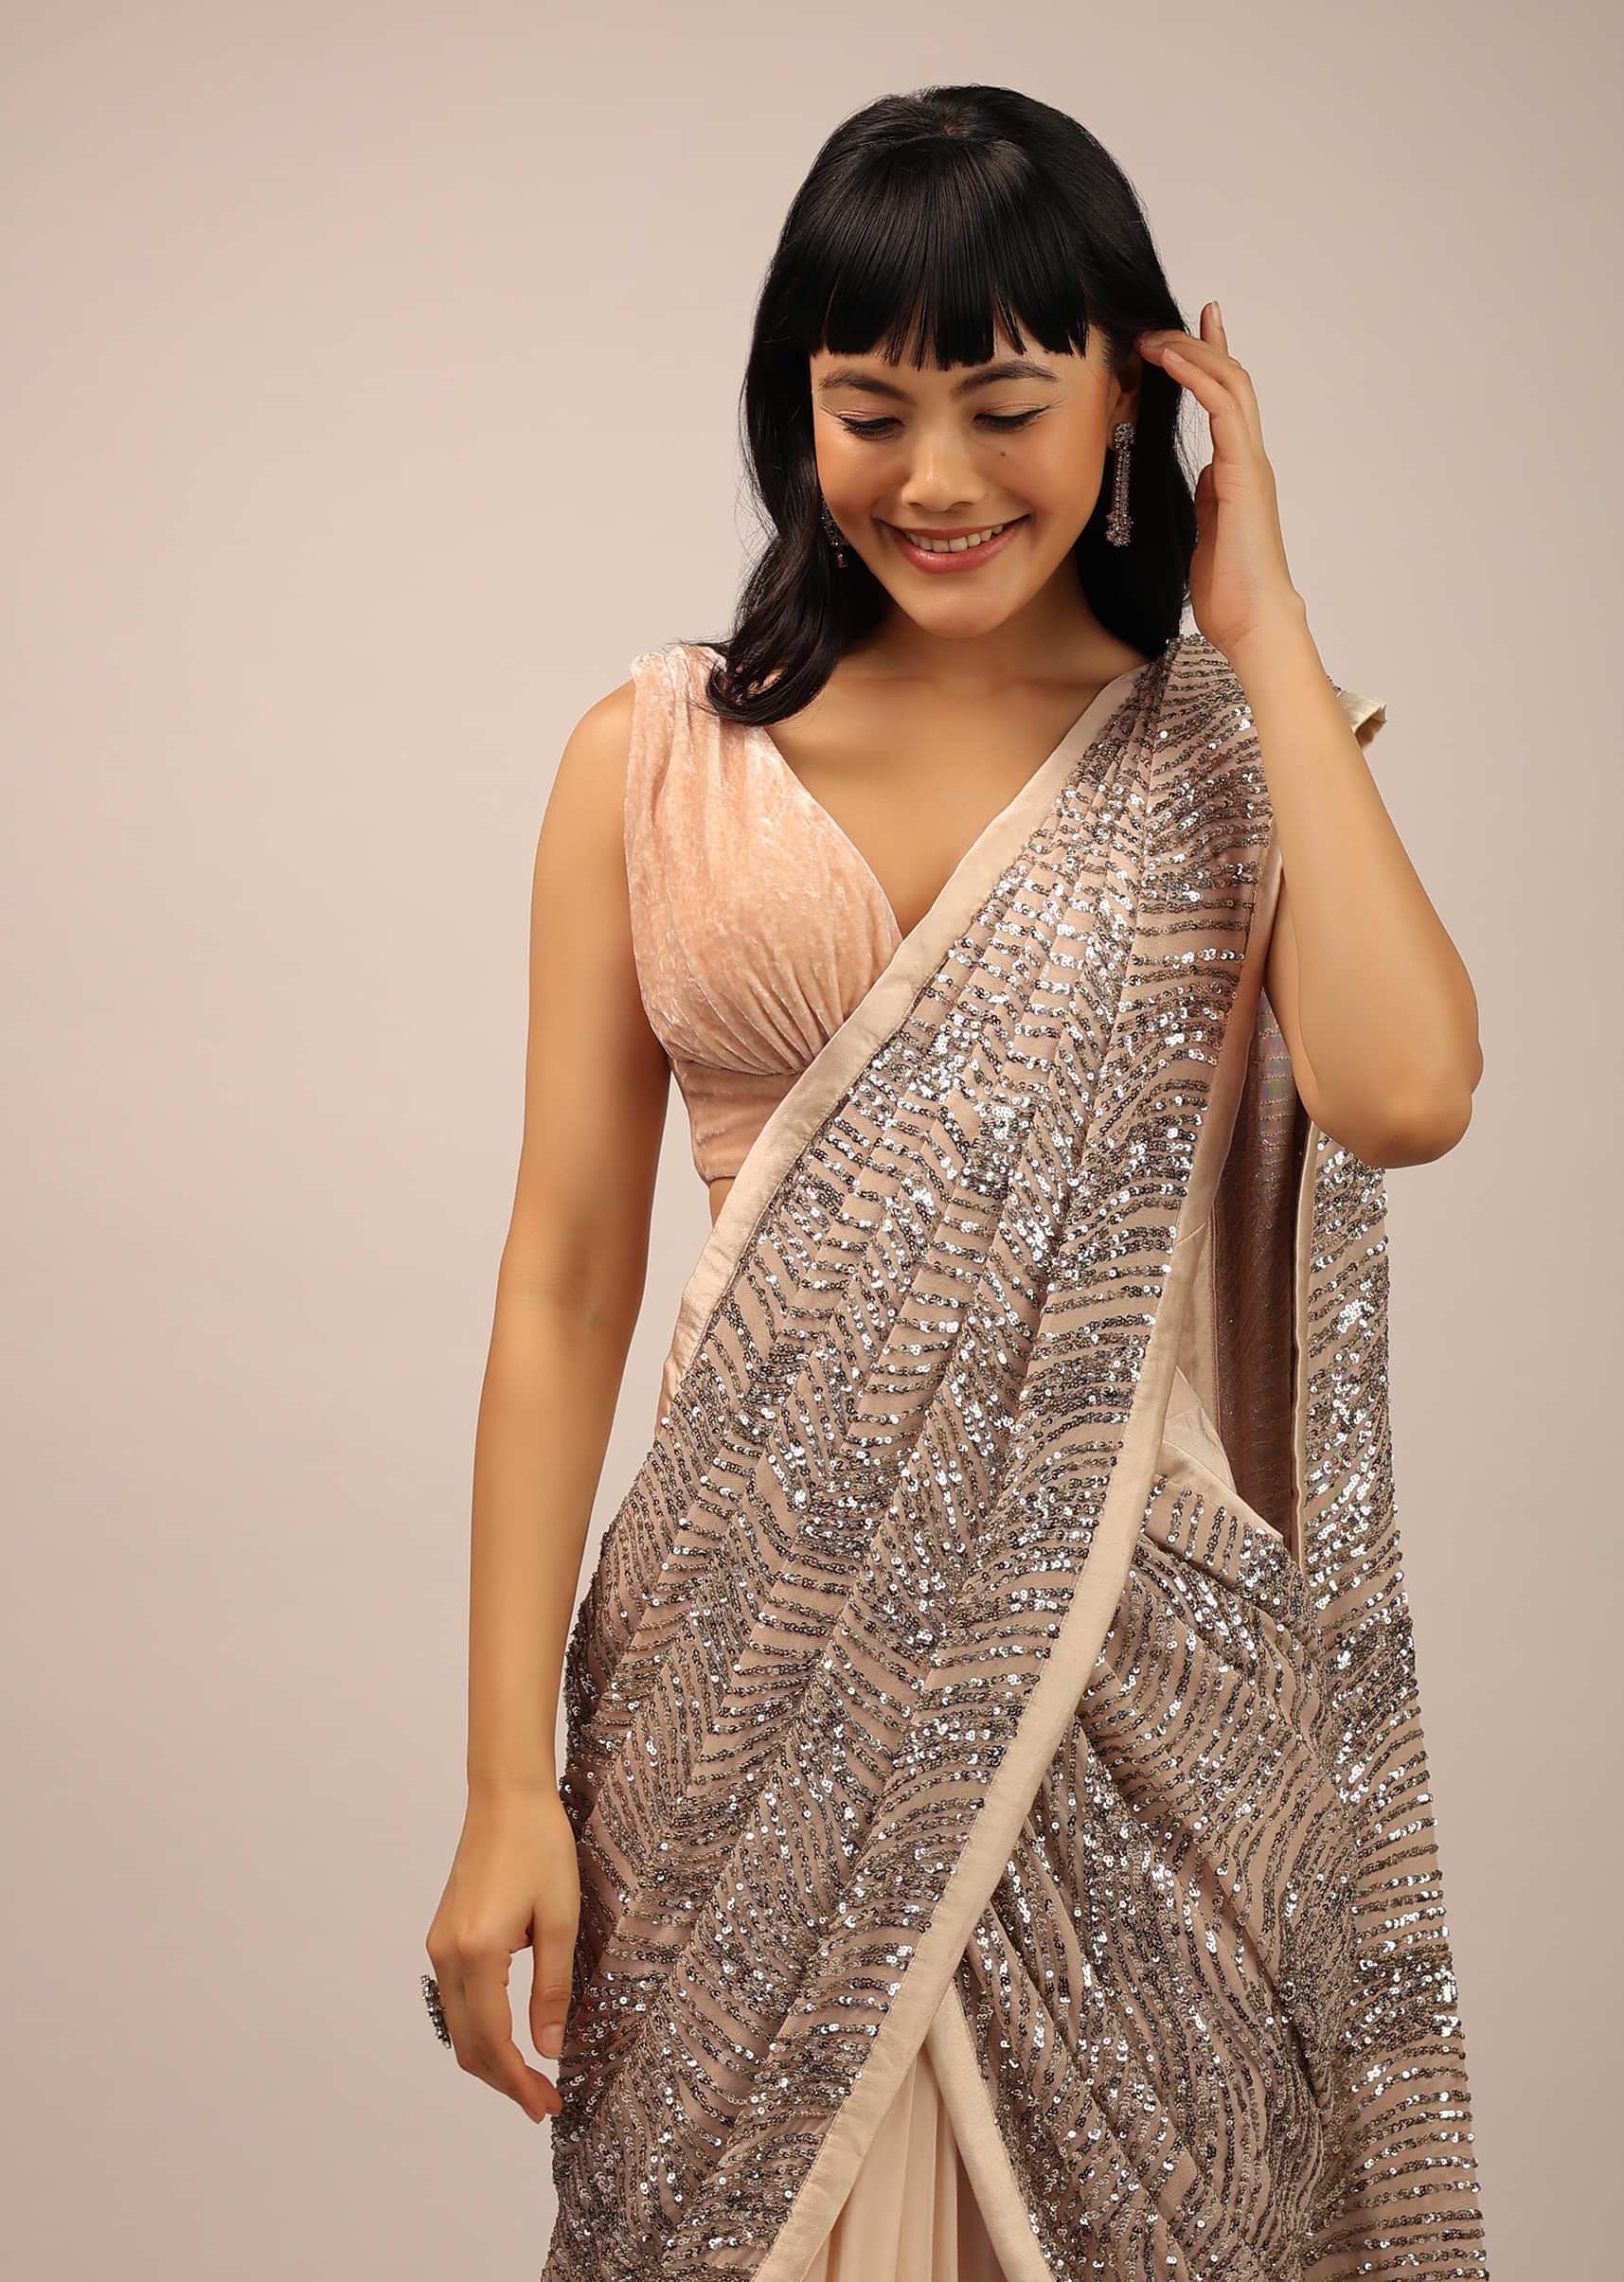 Beige Ready Pleated Saree With Sequins Work In A Floral Pattern And Velvet Blouse